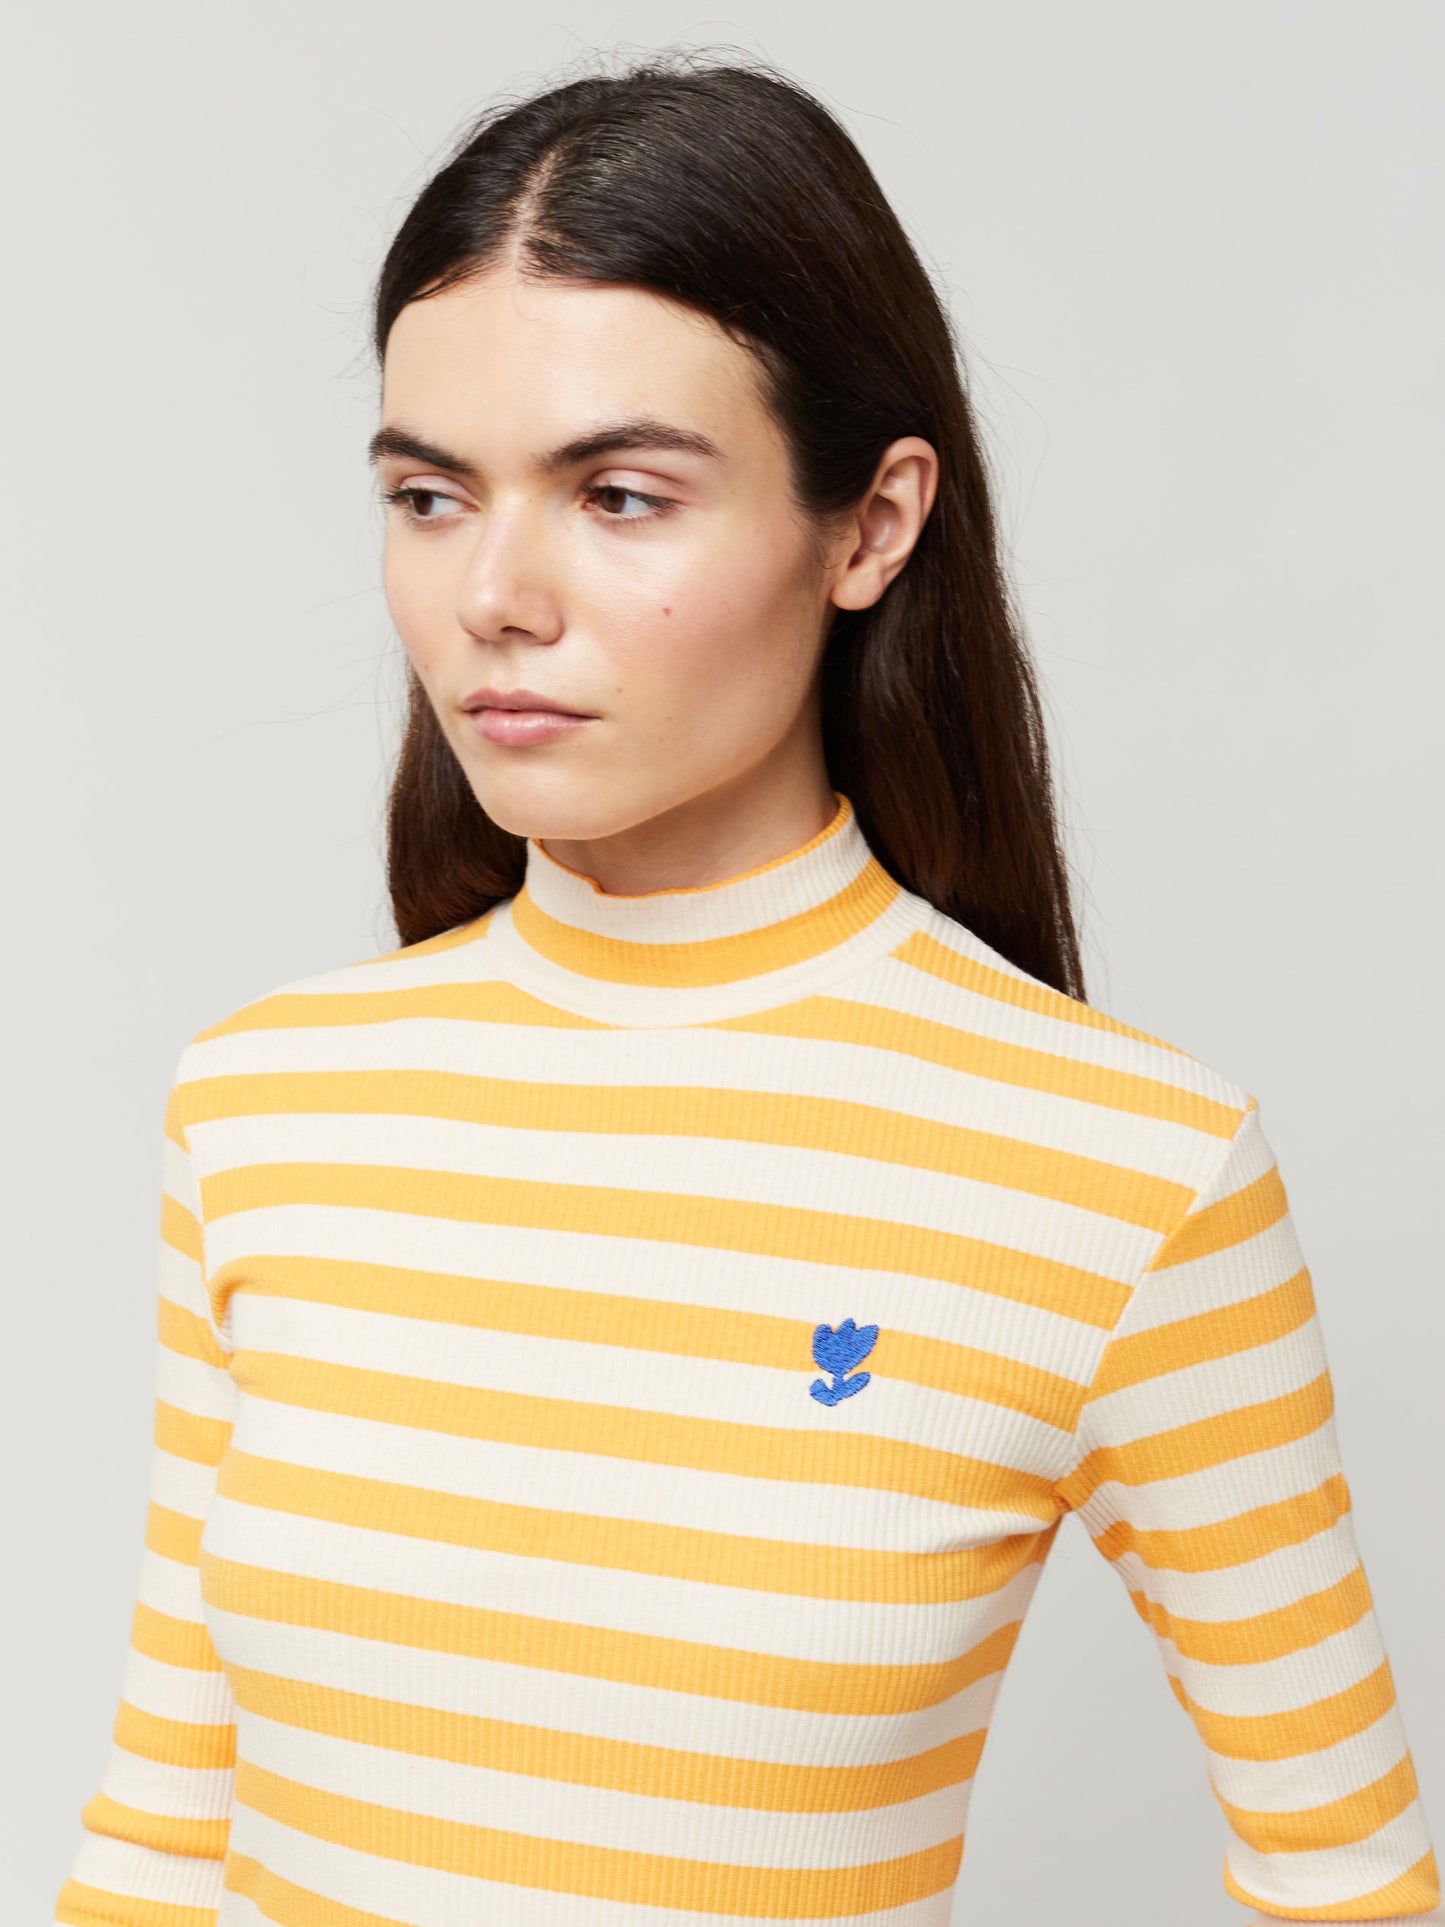 Ribbed striped turtle neck T-shirt